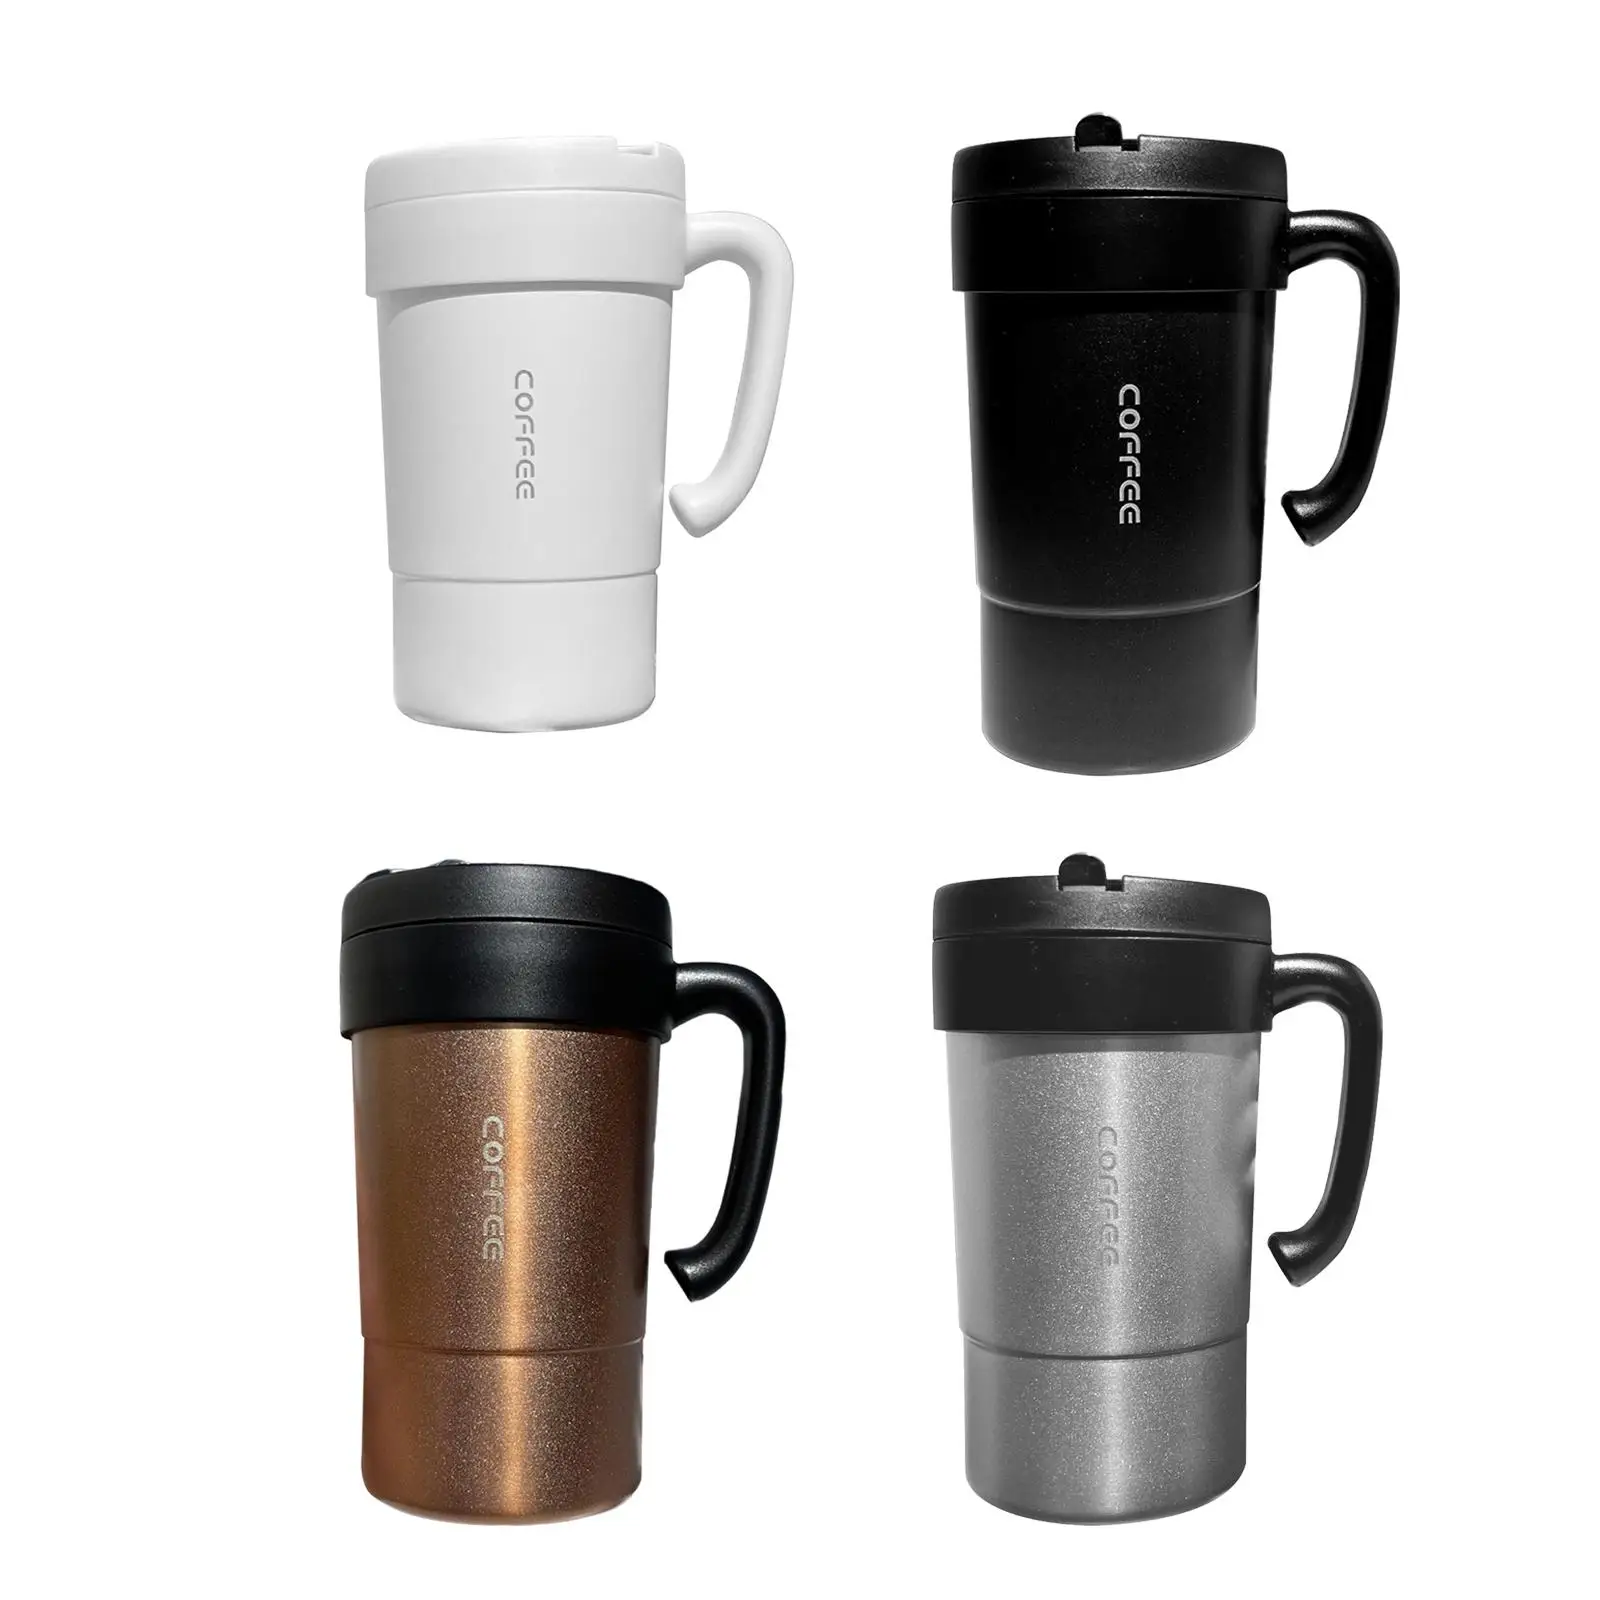 Insulated Thermal Mug Stainless Steel Multipurpose with Handle Practical Water Bottle Gifts Coffee Cups for Dorm Camping